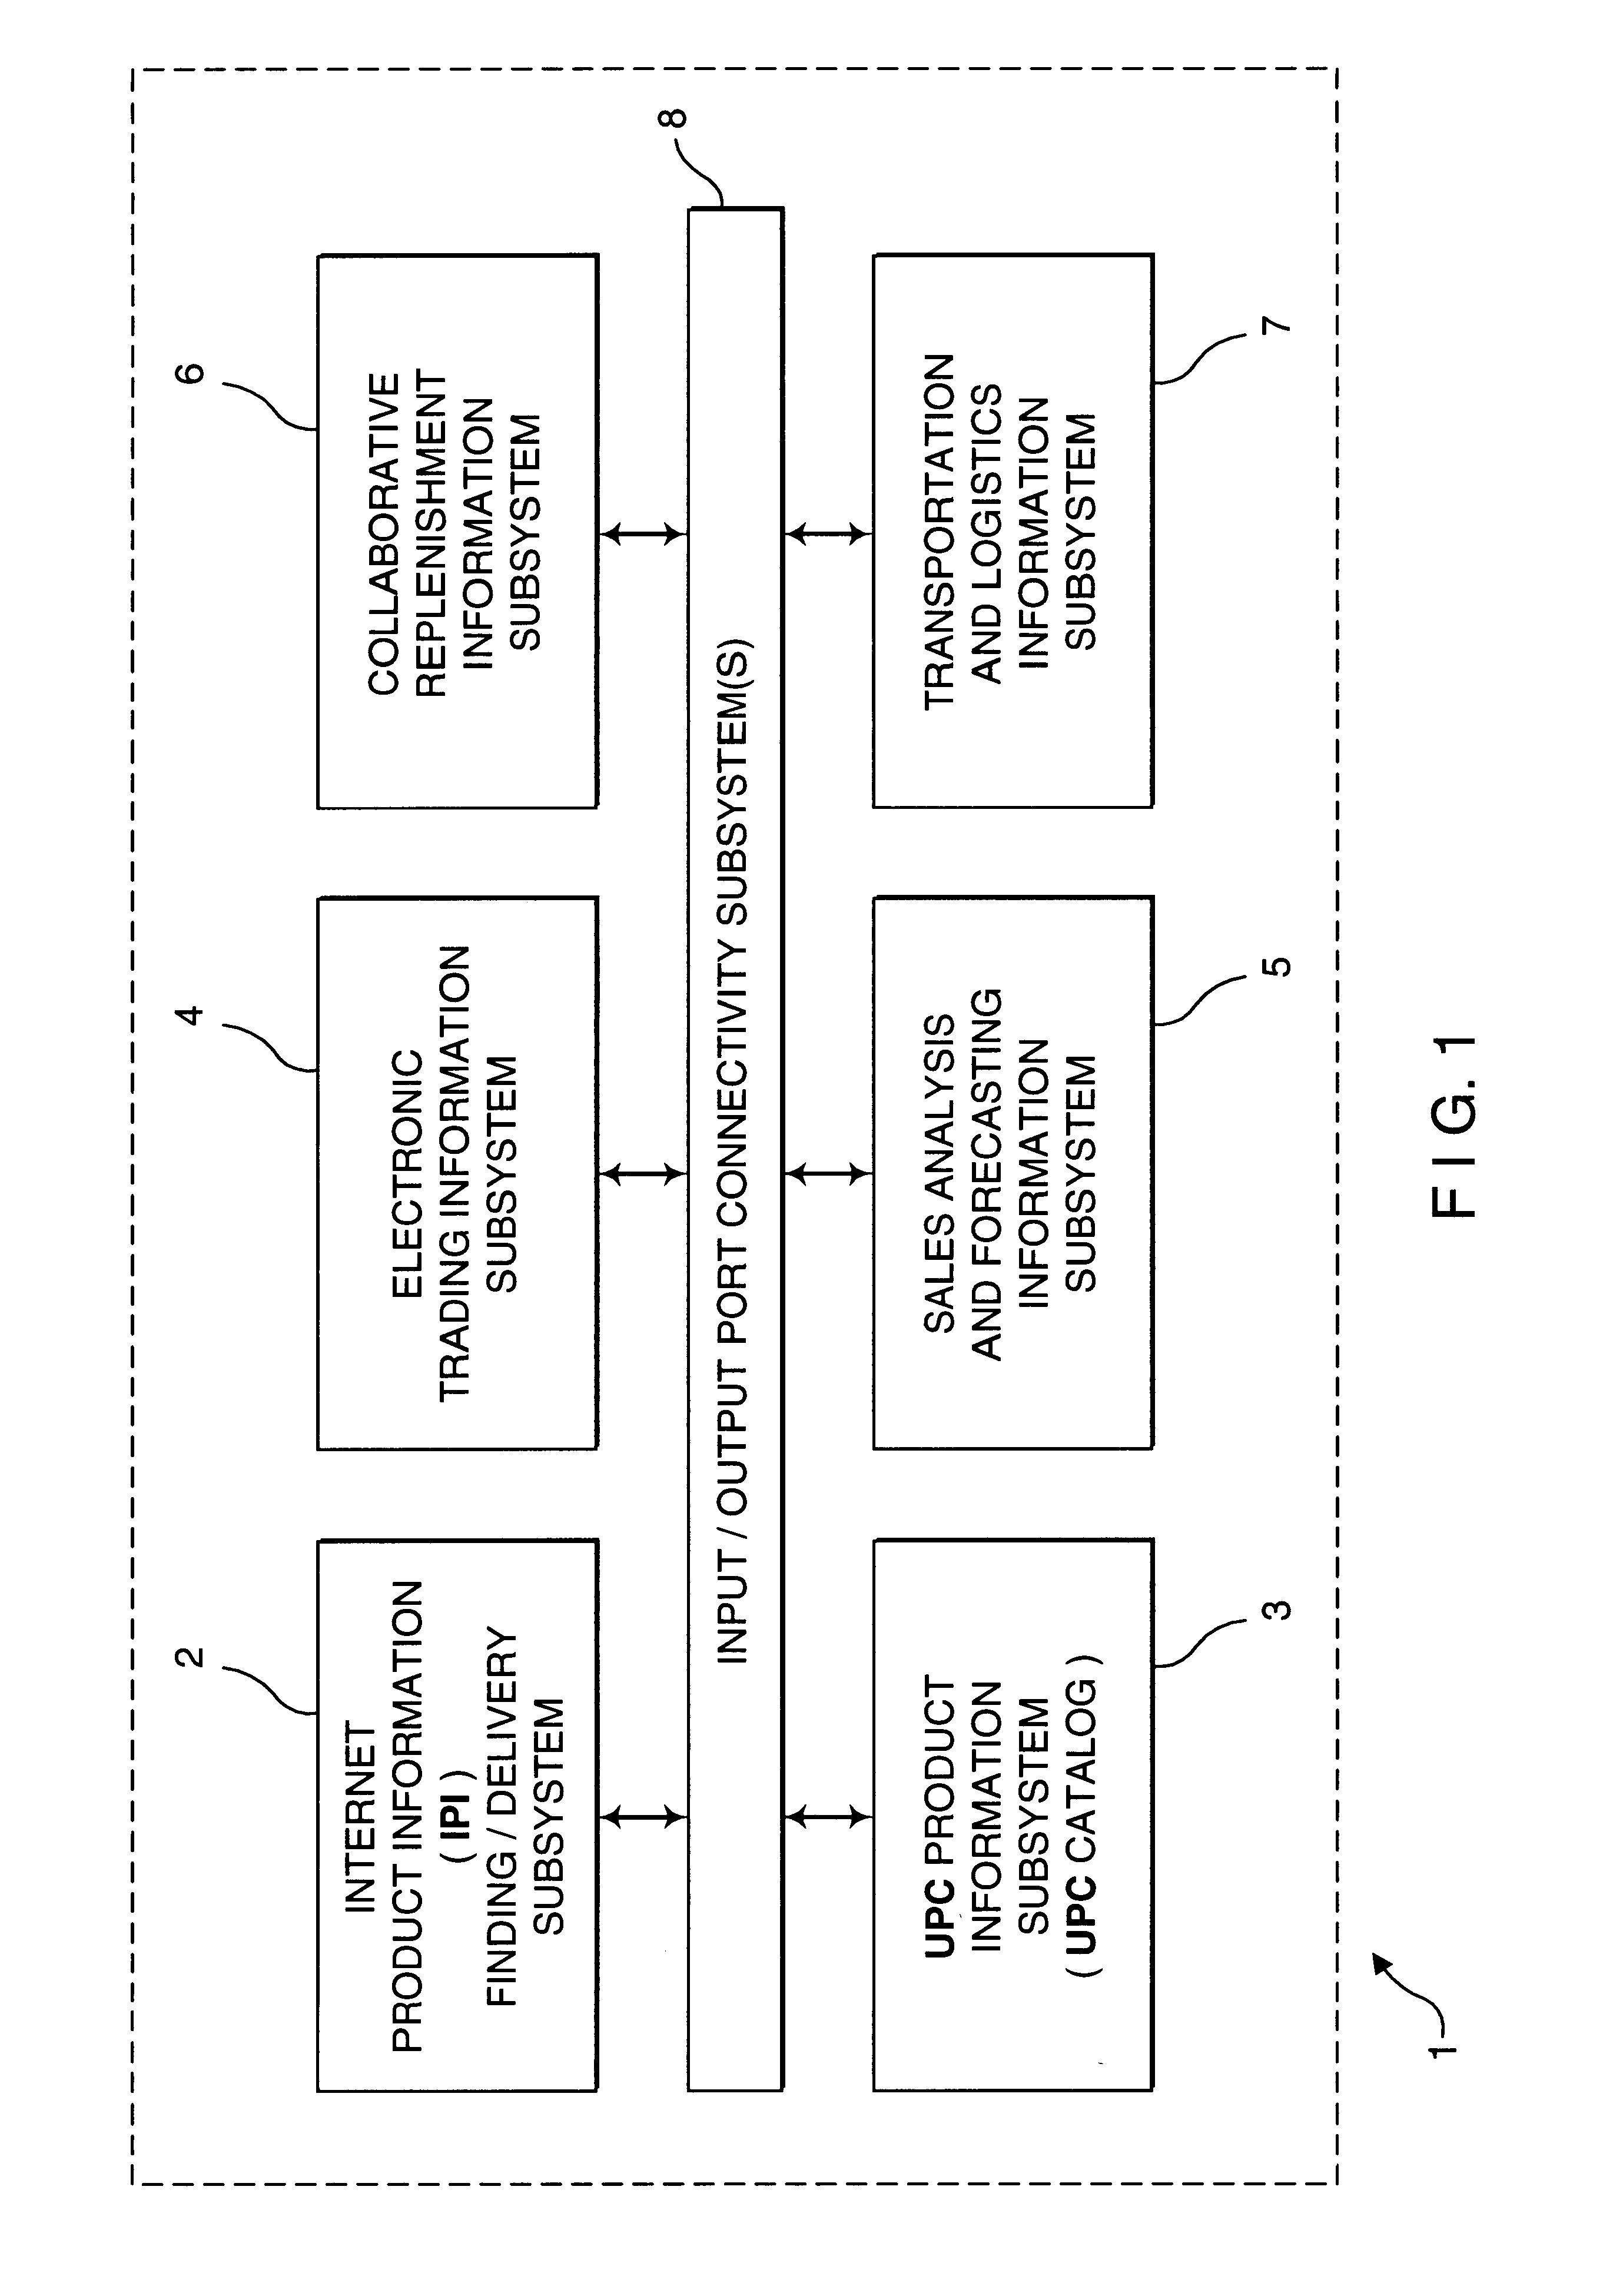 Consumer product information request (CPIR) enabling servlets and web-based consumer product information catalogs employing the same